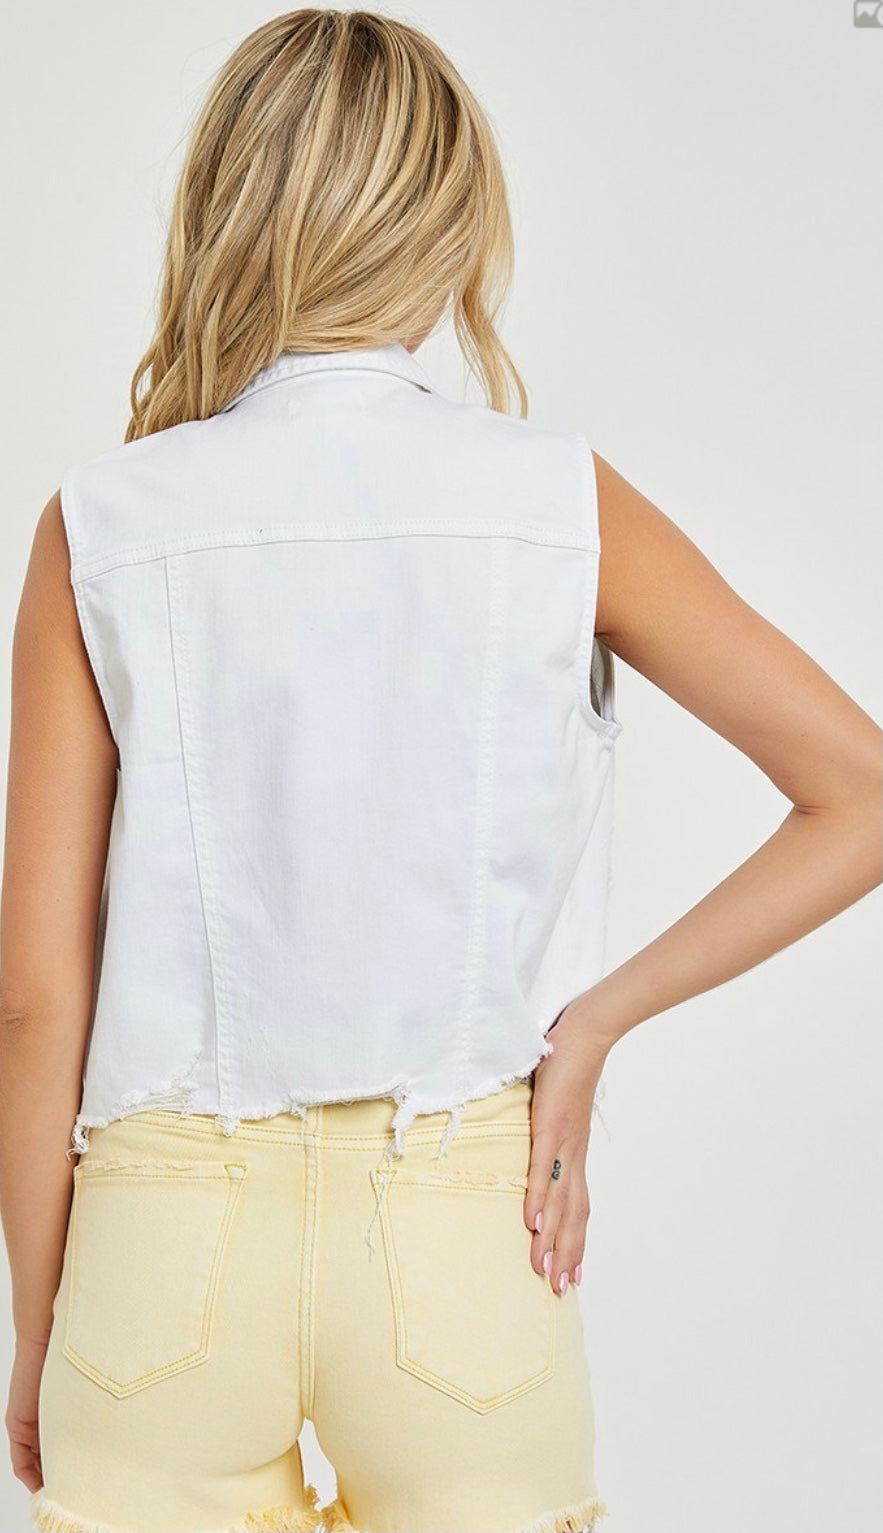 DISTRESSED CROP VEST
*Extended Sizing*